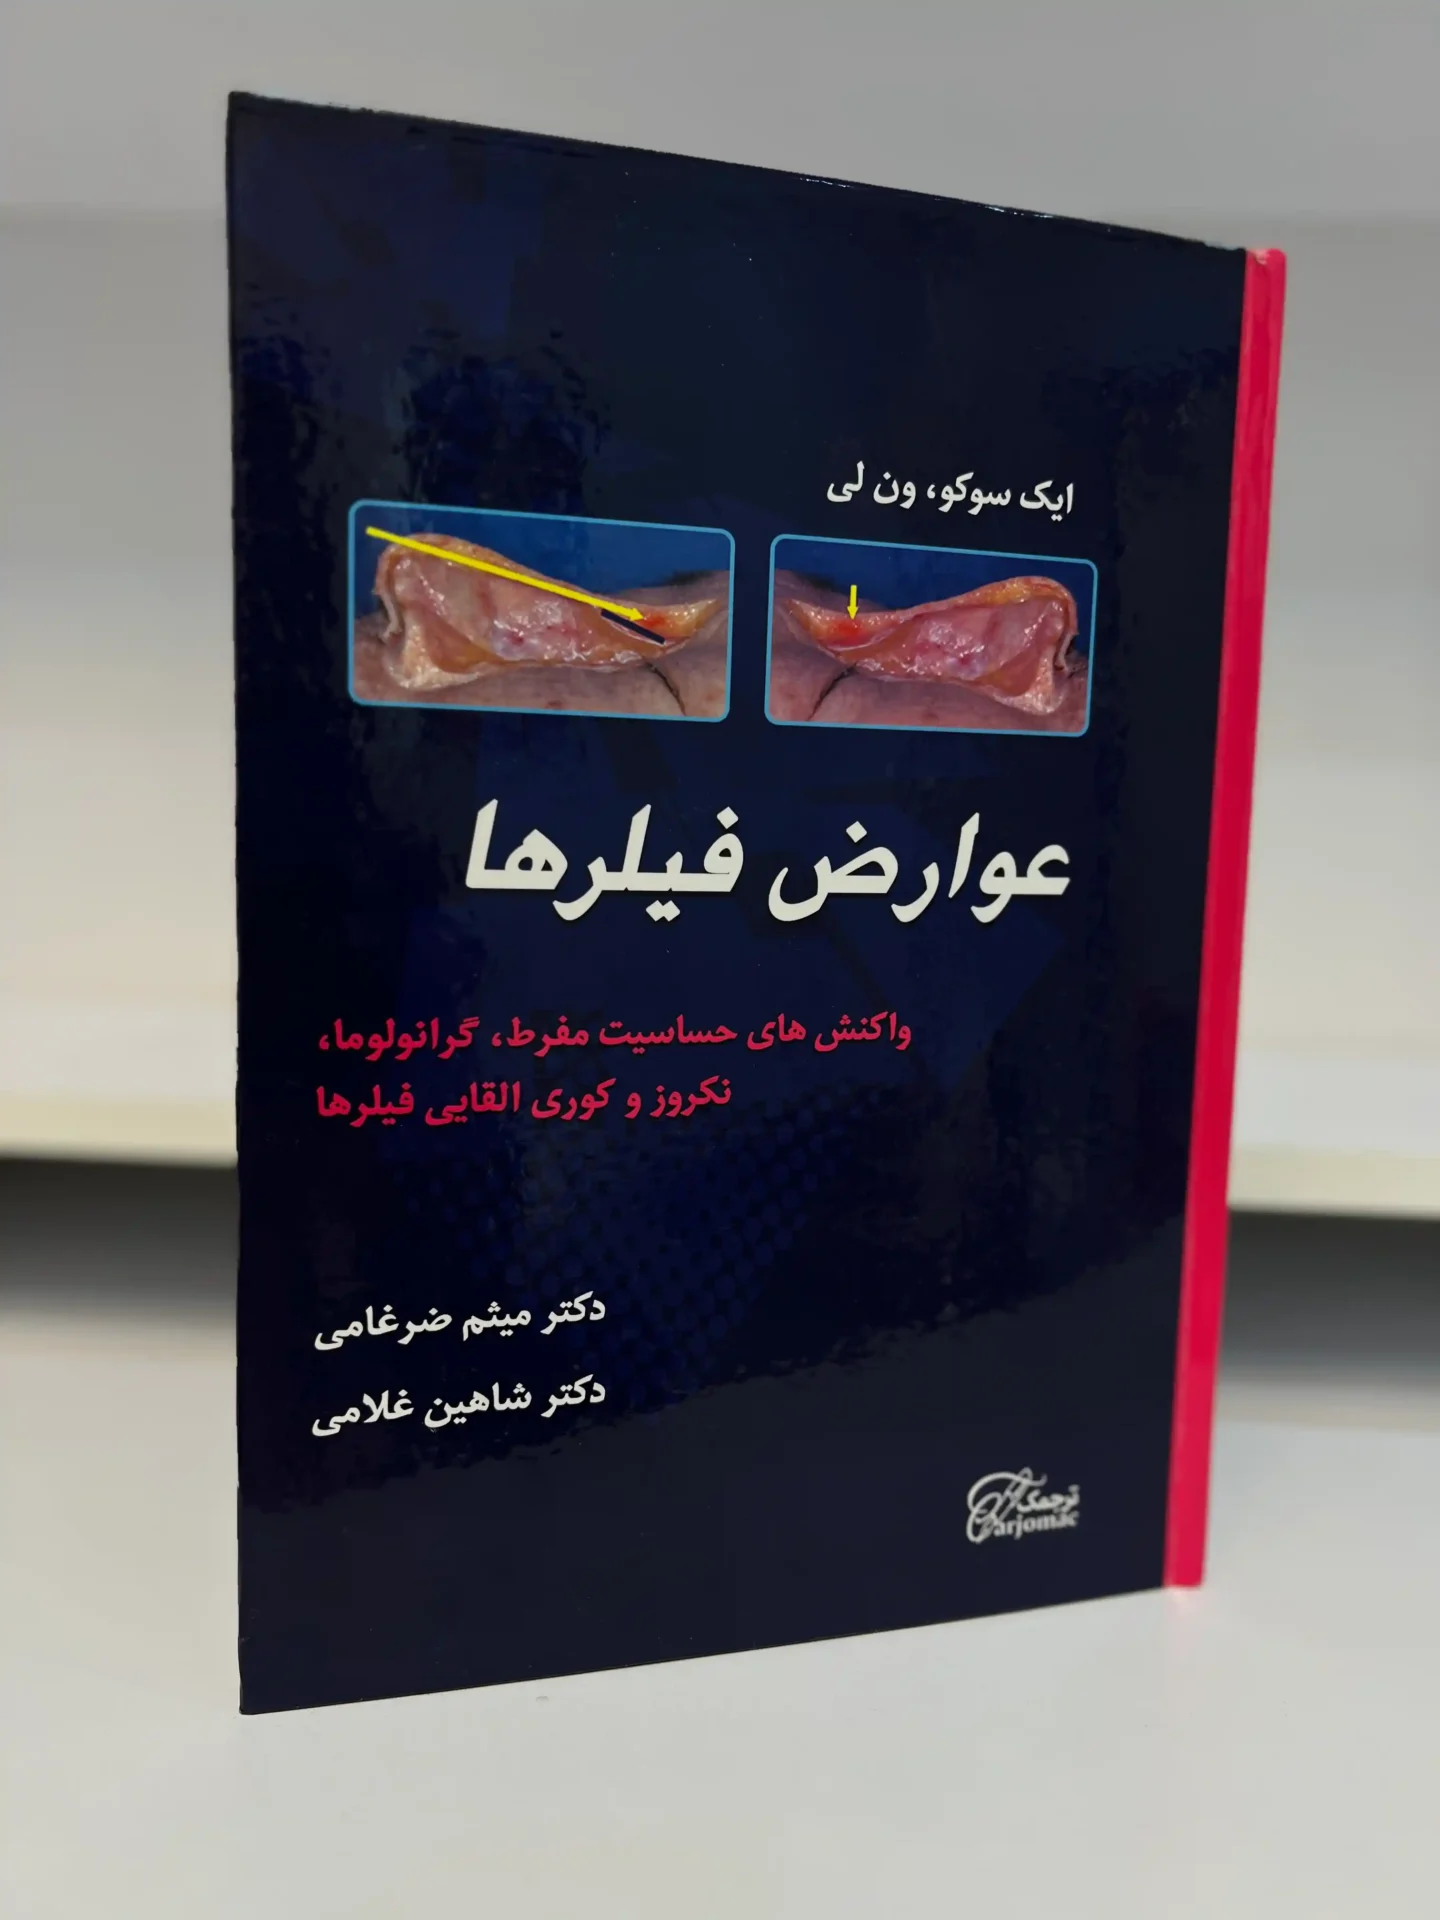 Dr. Zarghami's book on the complications of fillers